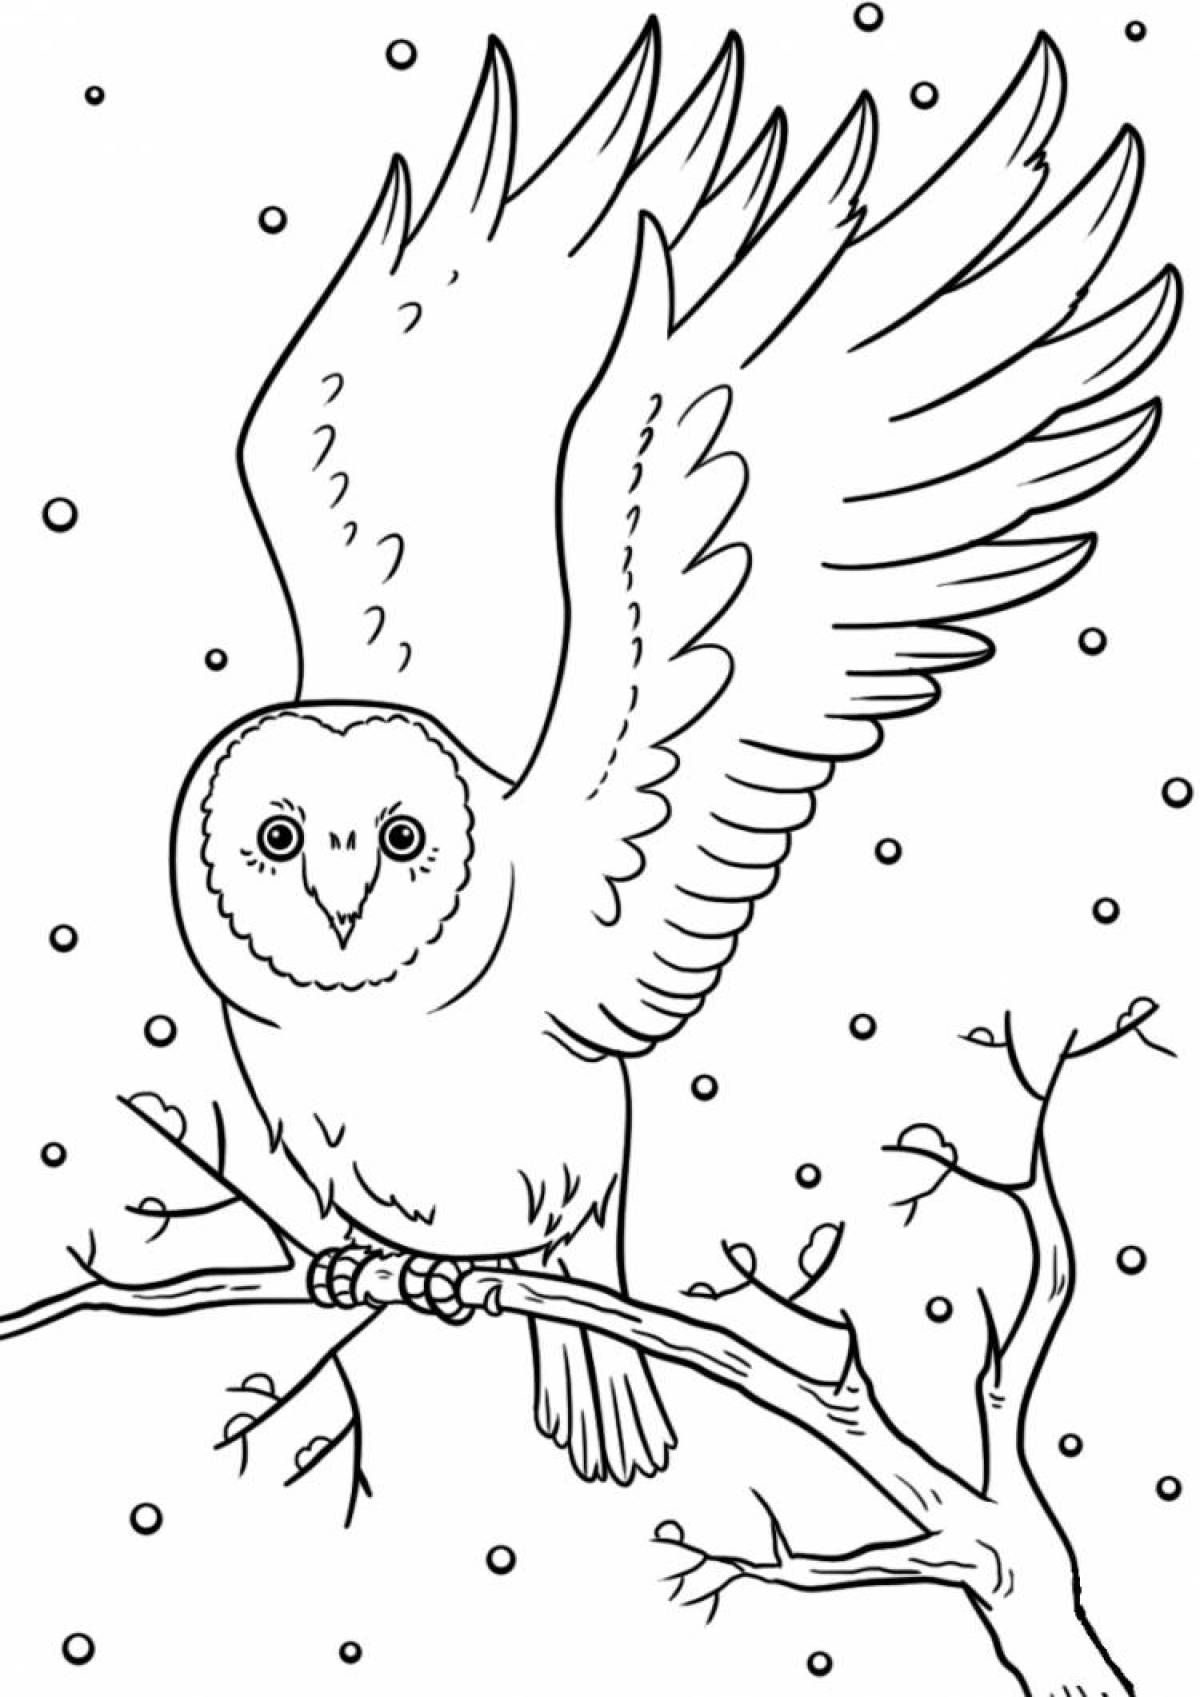 Adorable wintering birds coloring book for children 3-4 years old